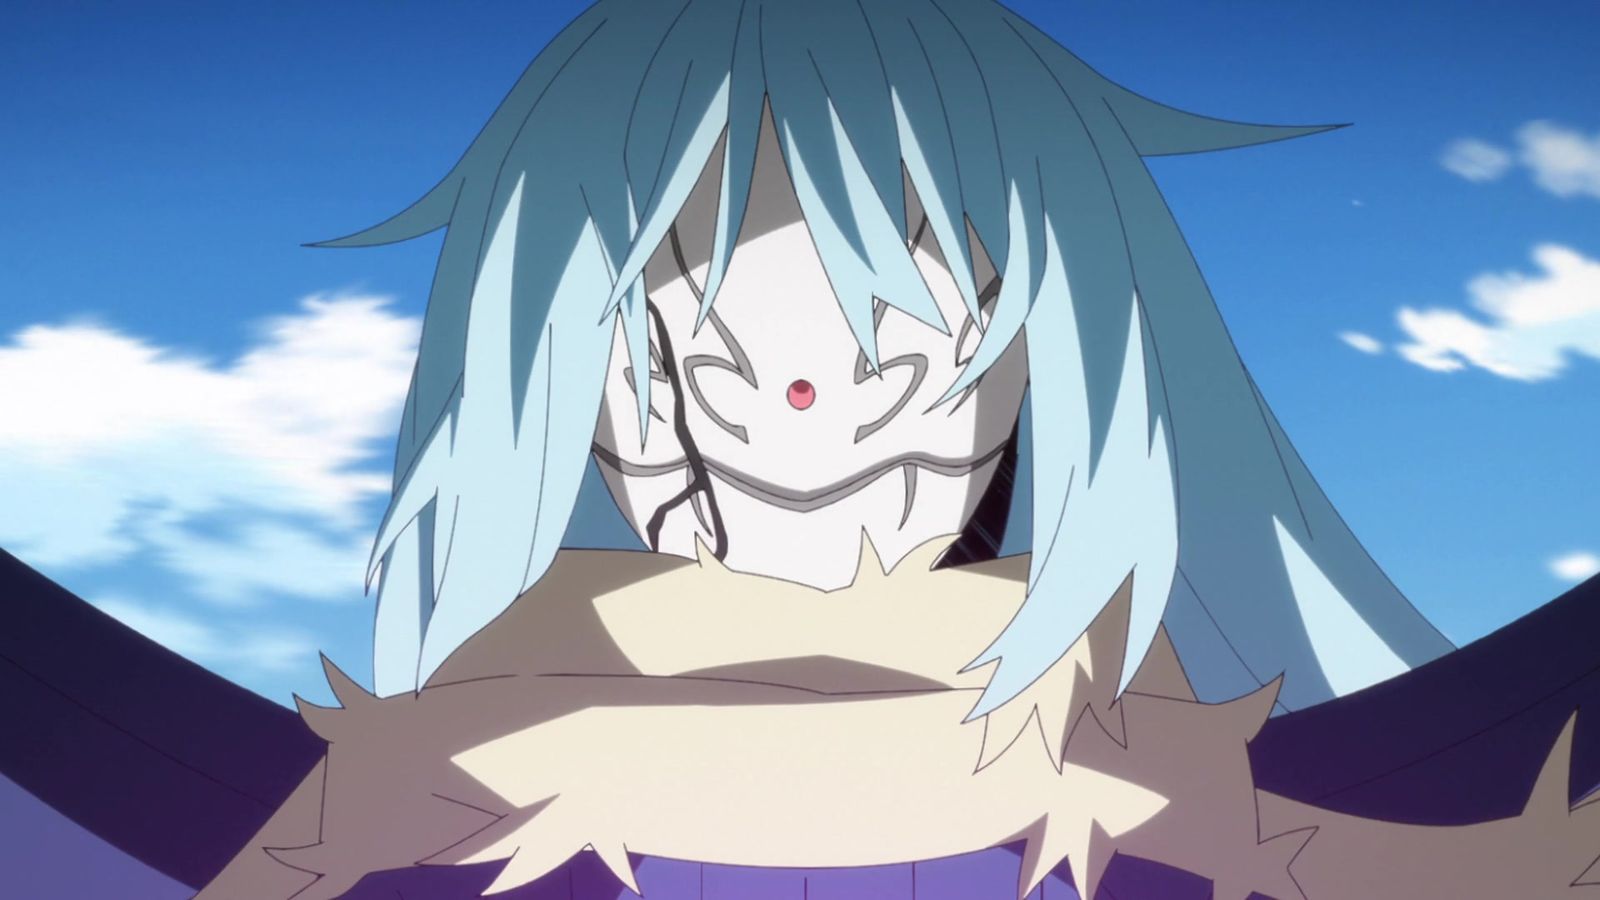 That Time I Got Reincarnated as a Slime Season 2 Episode 13 Release Date and Time 2